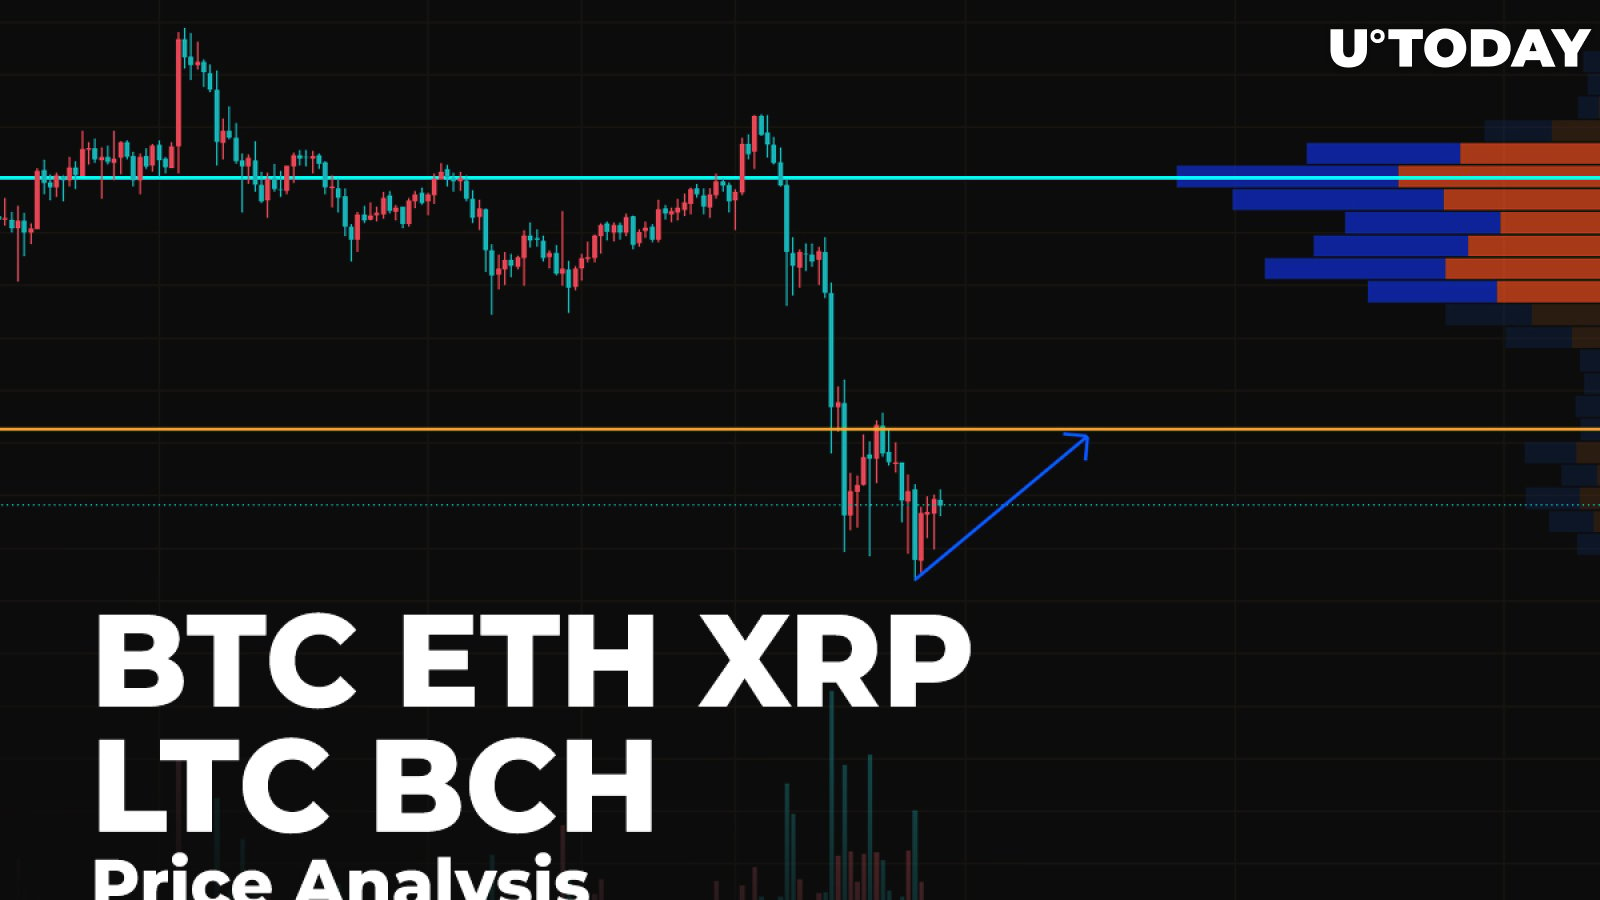 BTC, ETH, XRP, LTC and BCH Price Analysis for September 6